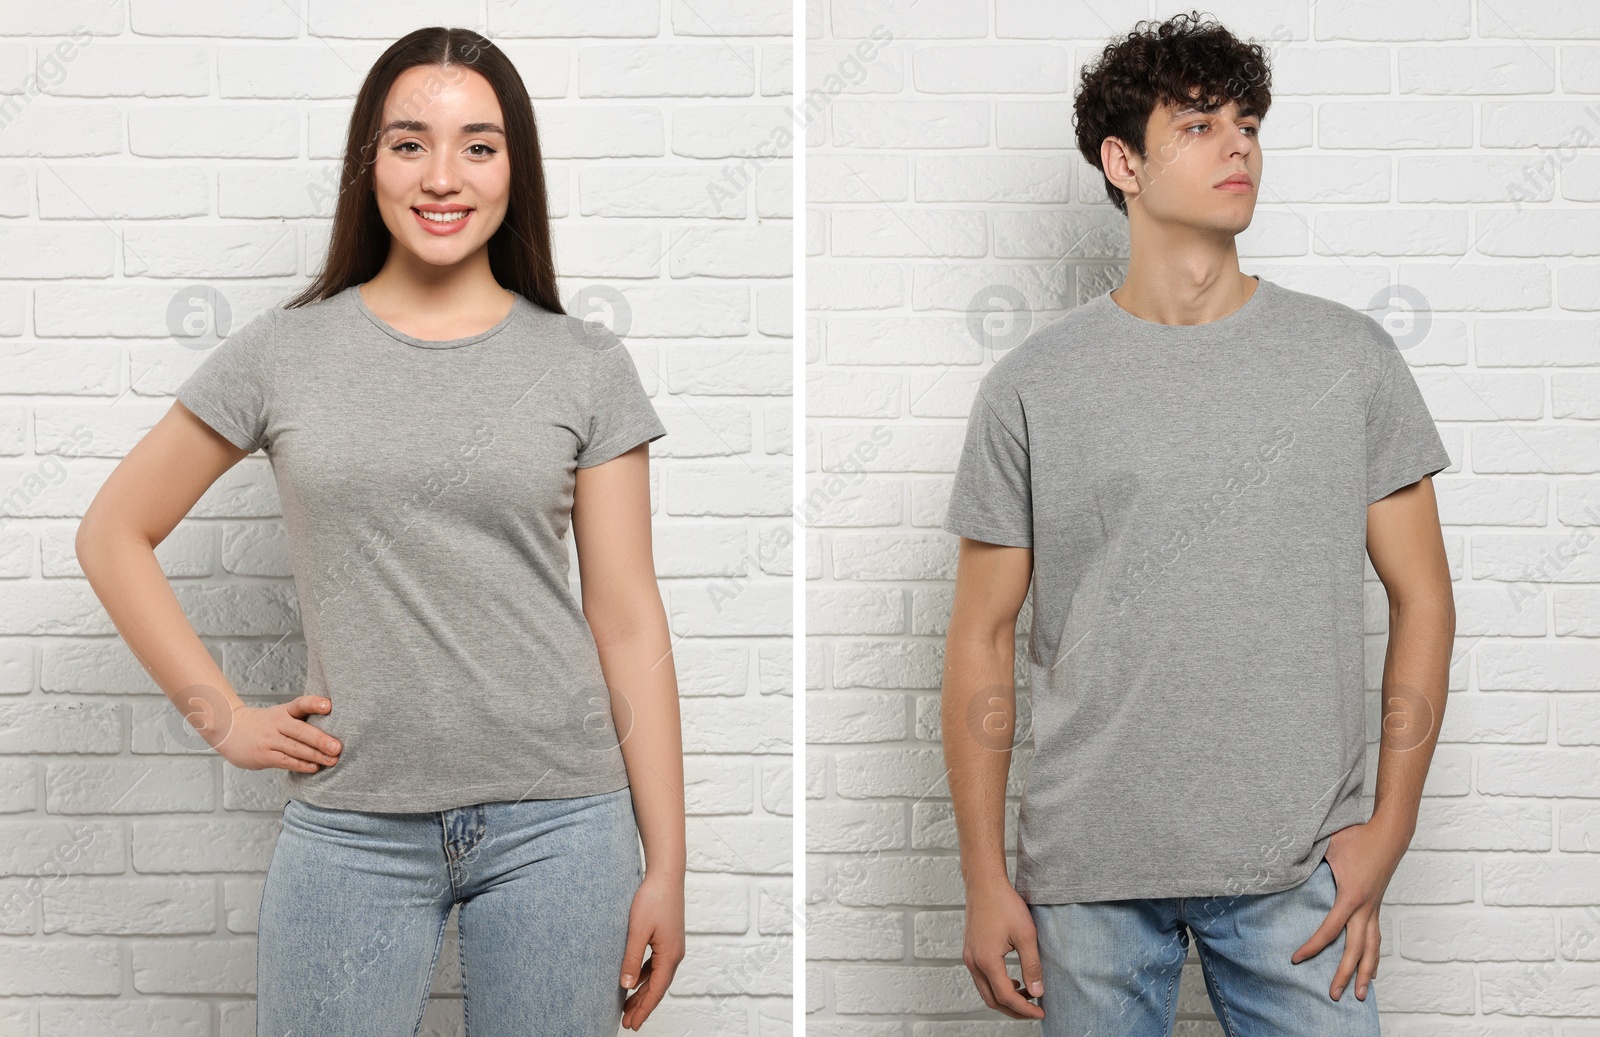 Image of People wearing grey t-shirts near white brick wall. Mockup for design